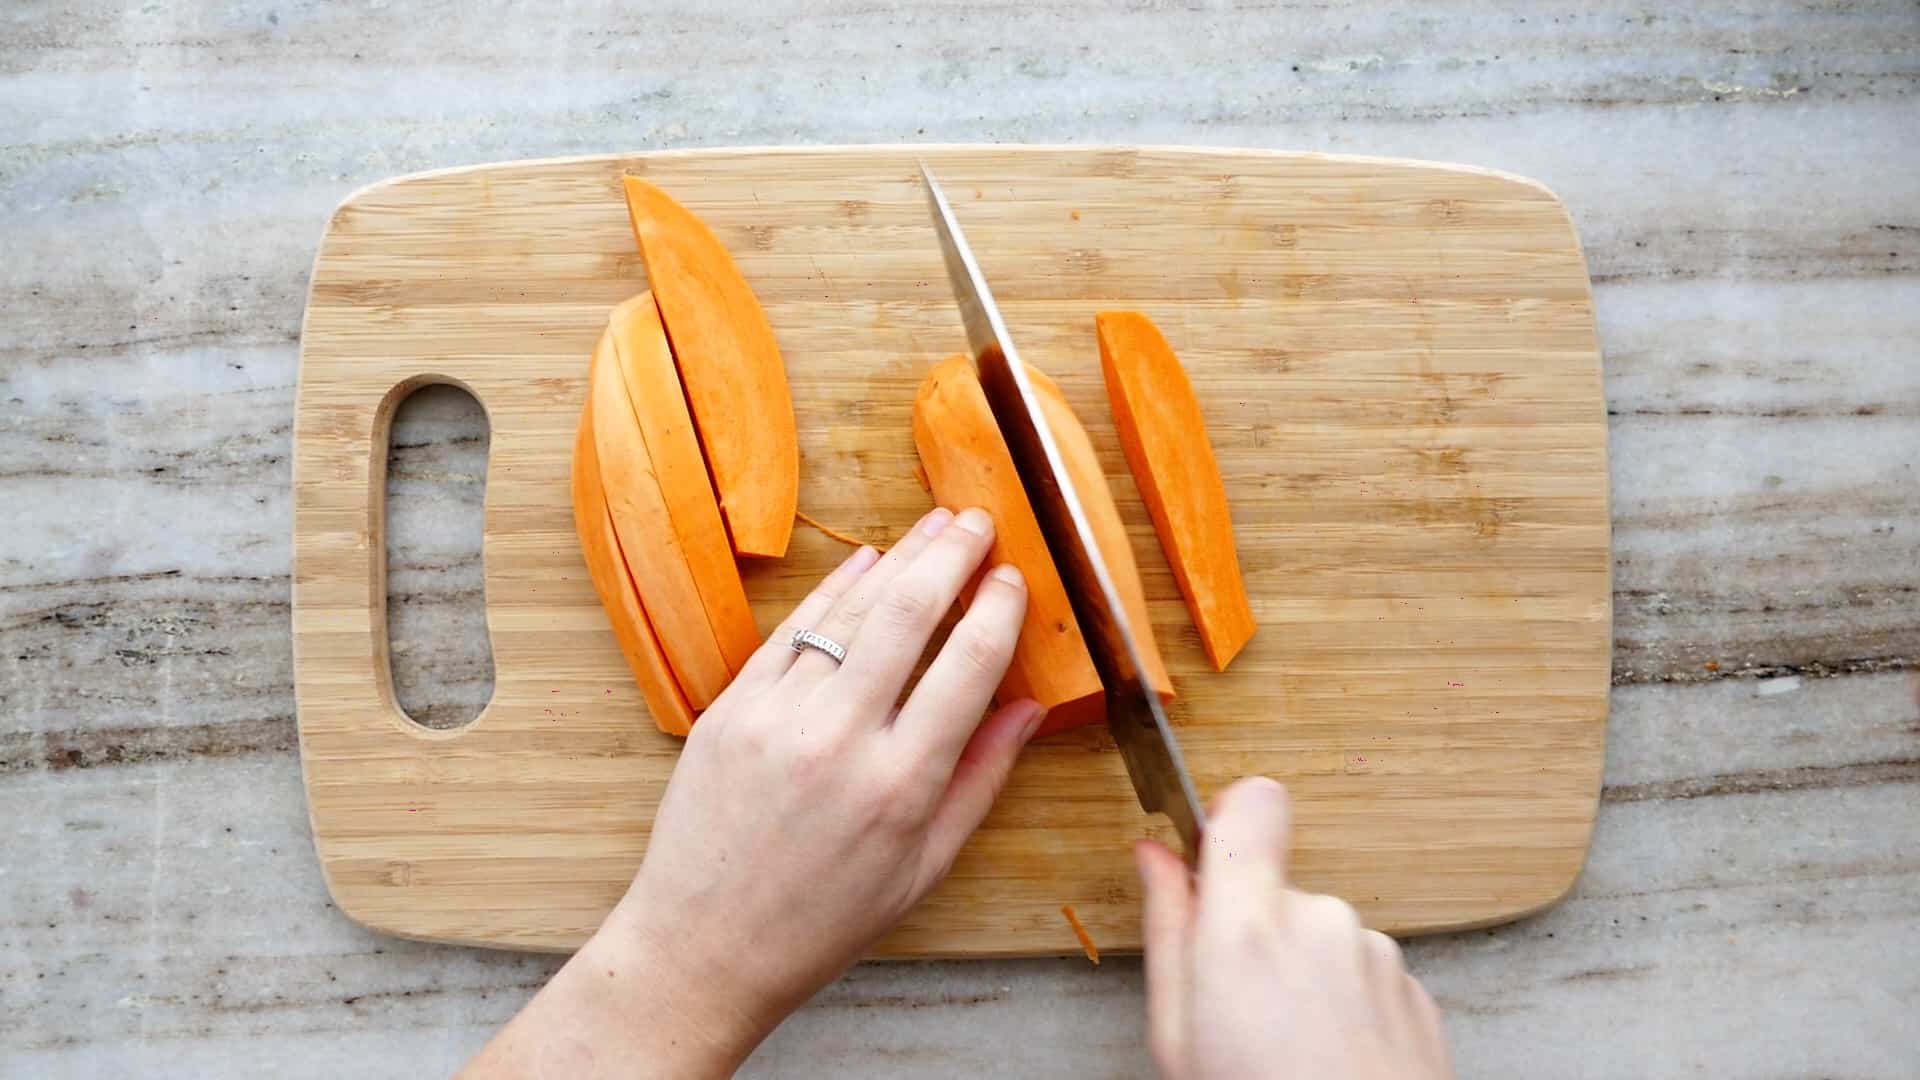 woman cutting sweet potatoes into wedges with a knife and bamboo cutting board